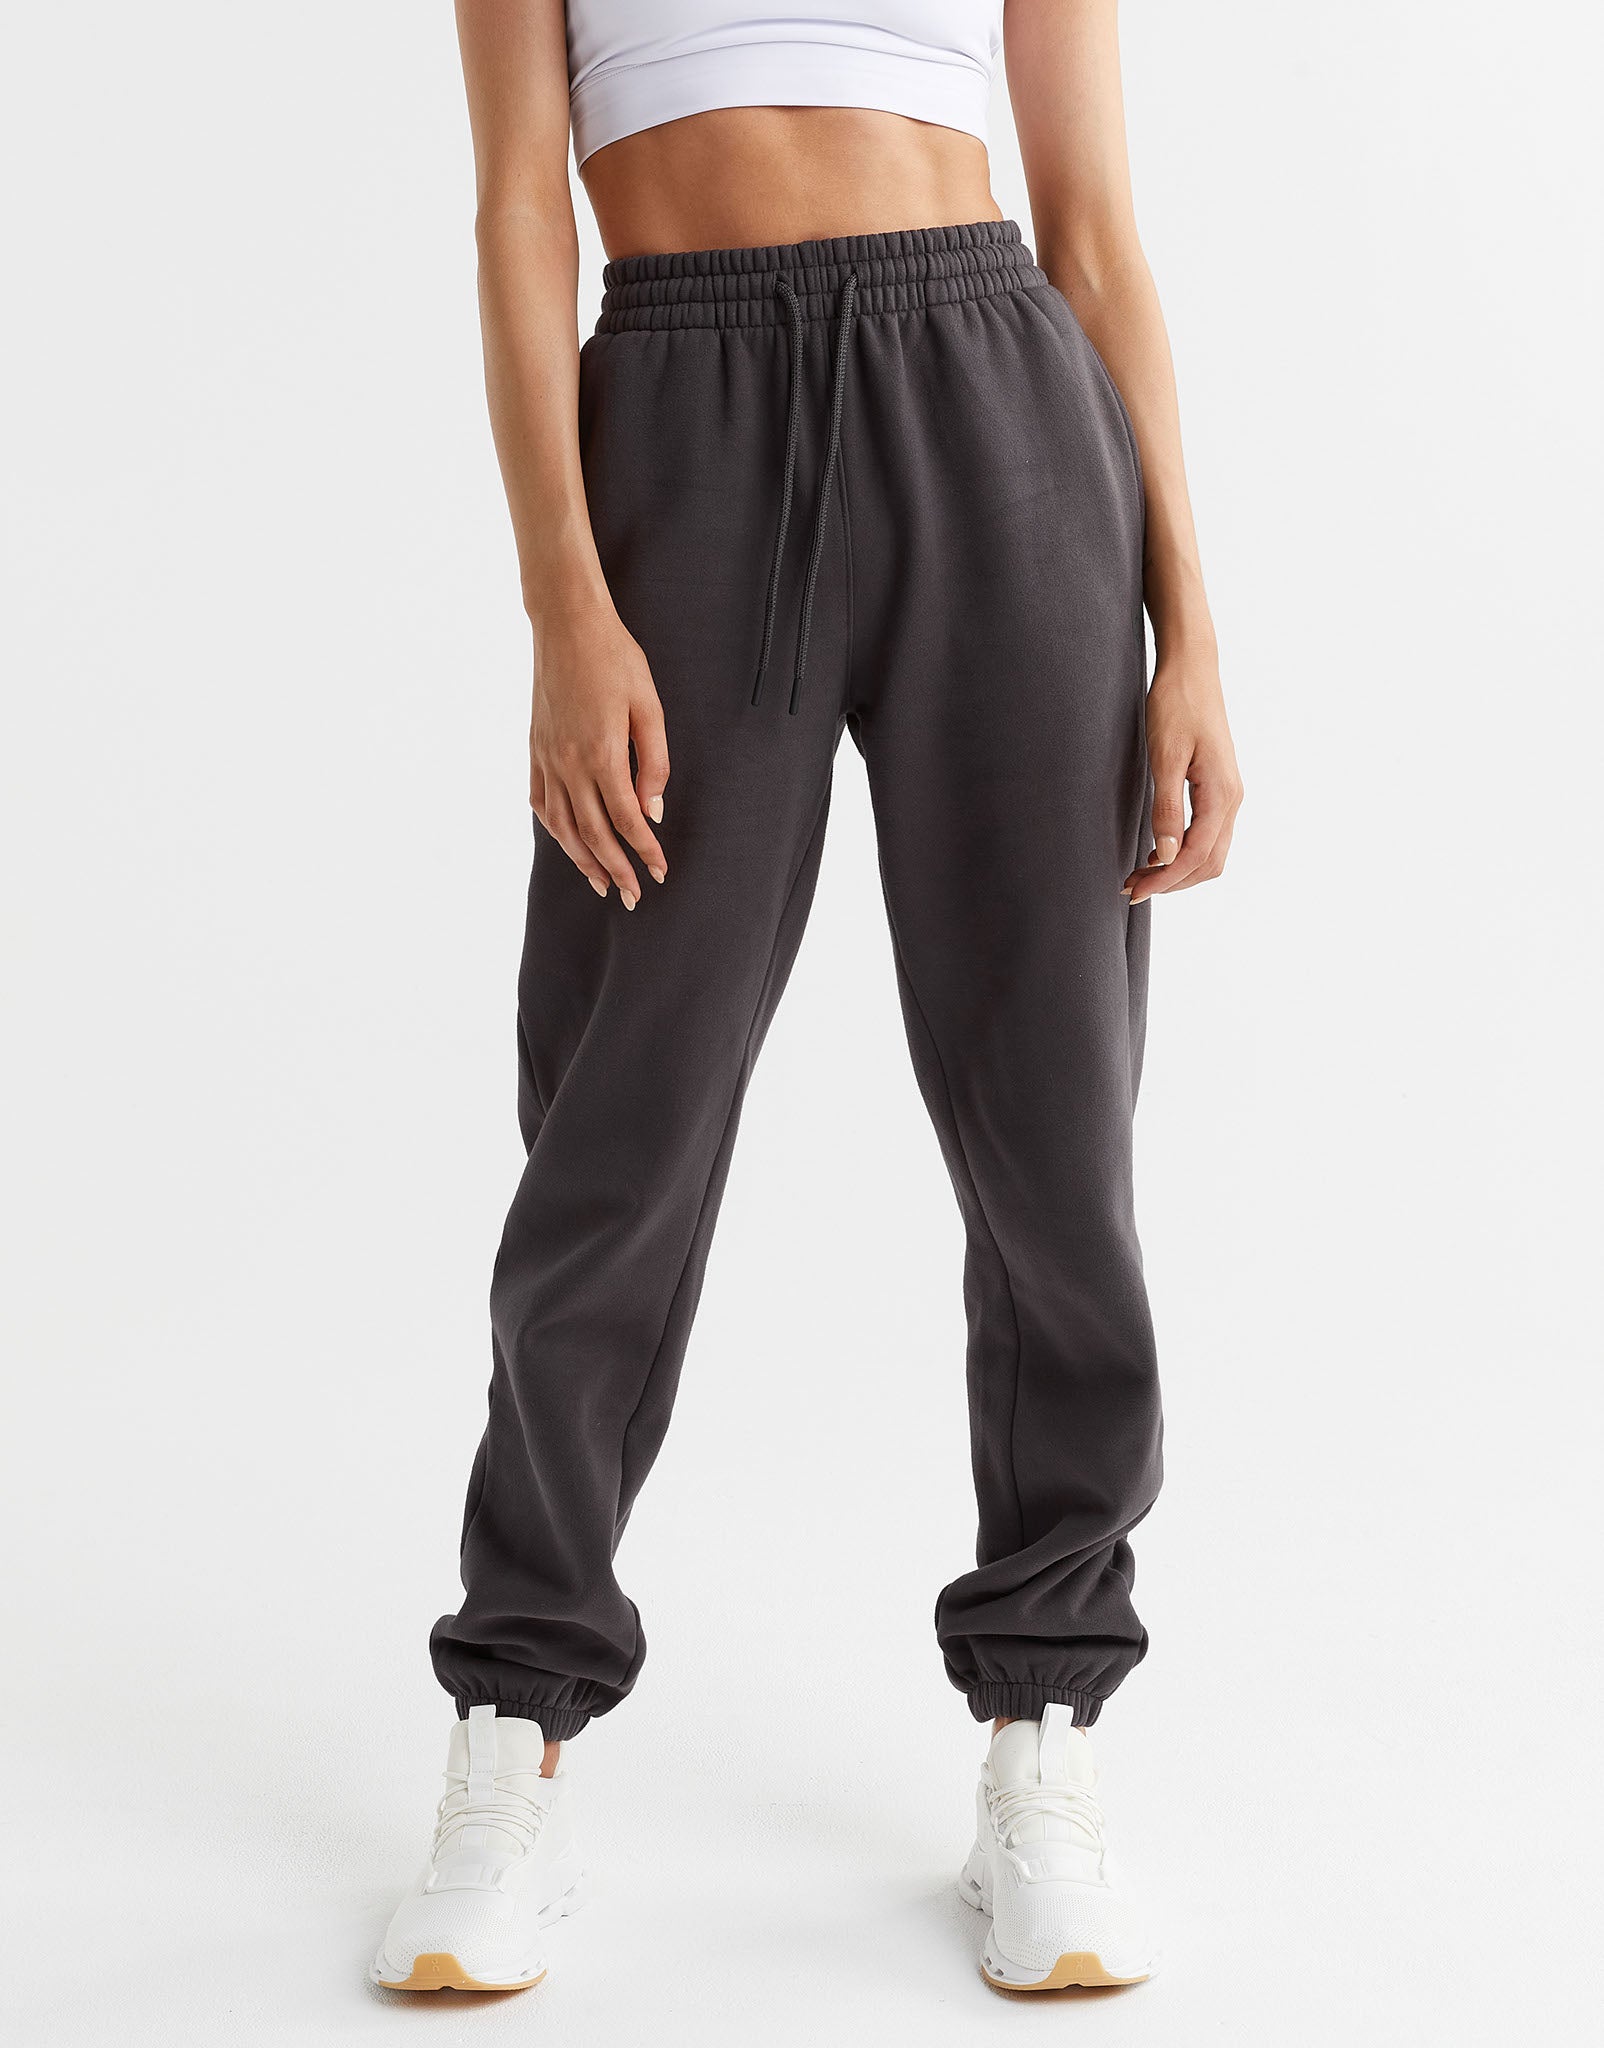 Lilybod-Lucy-Oversized-Fleece-Track-Pant-Coal-Gray-LL89-CLG-1-New.jpeg